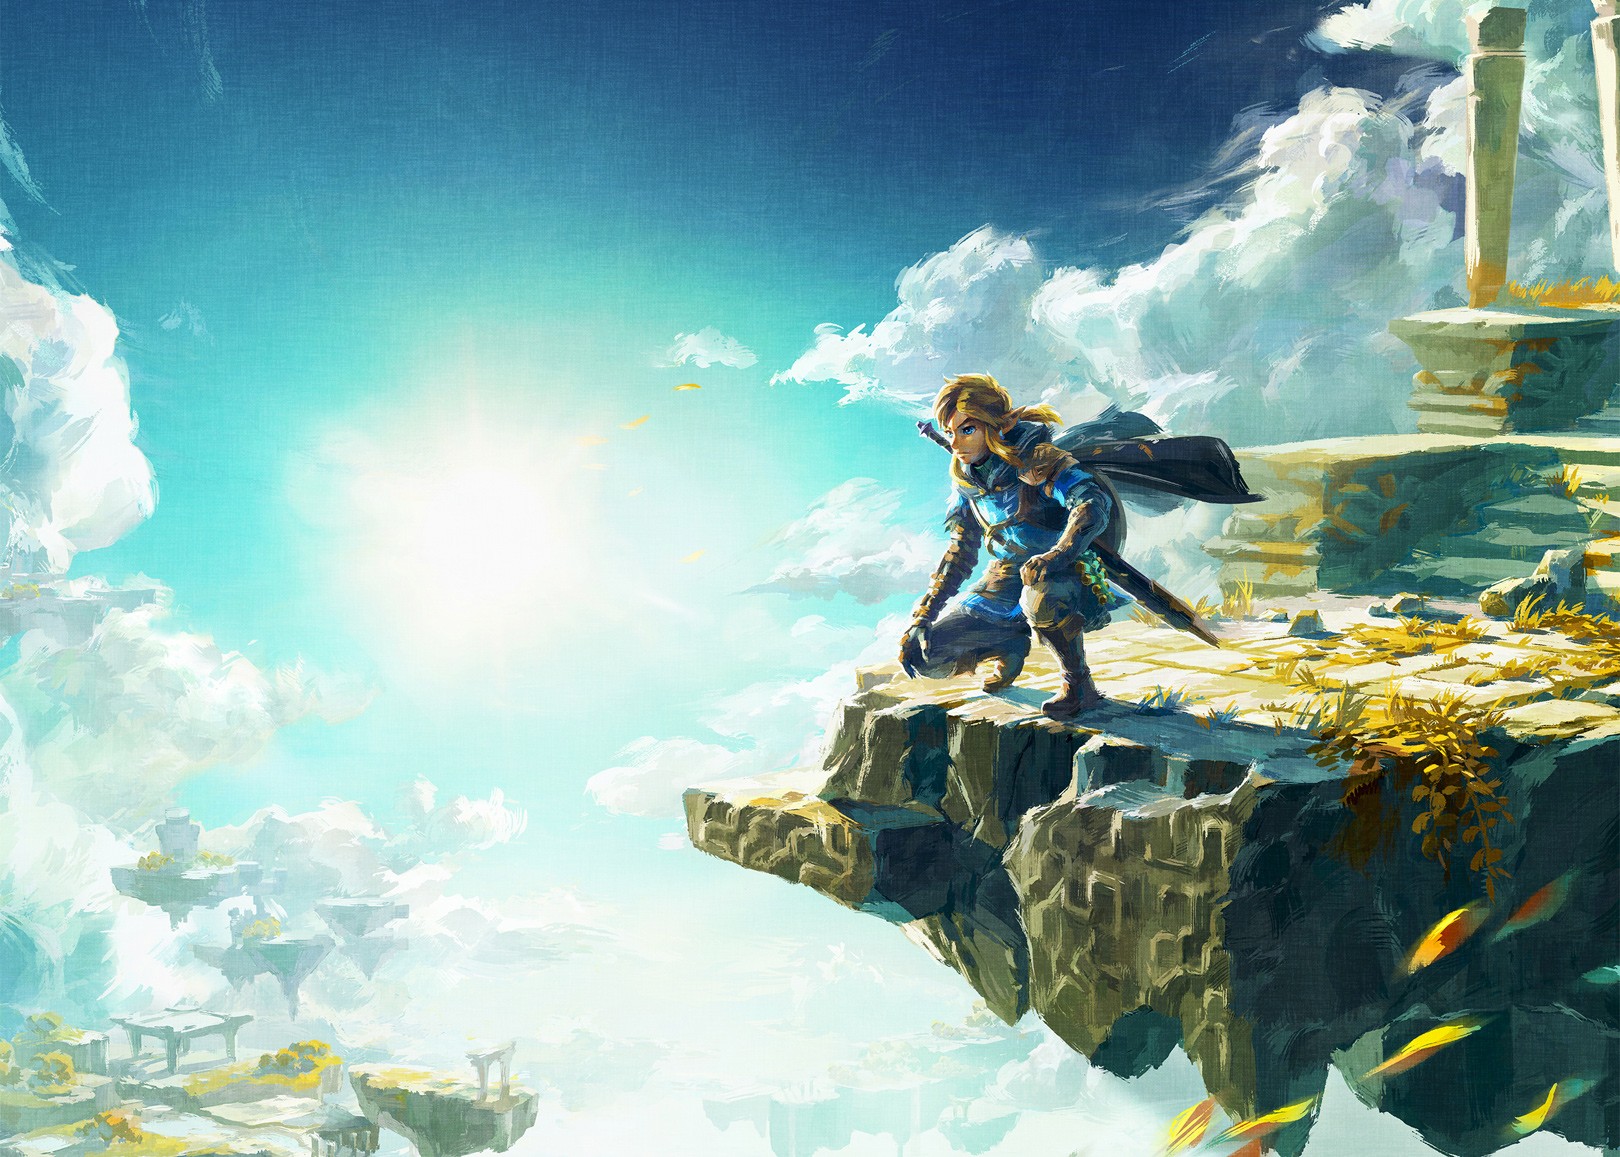 Check Out These Stunning Ocarina of Time Art Pieces - Zelda Dungeon